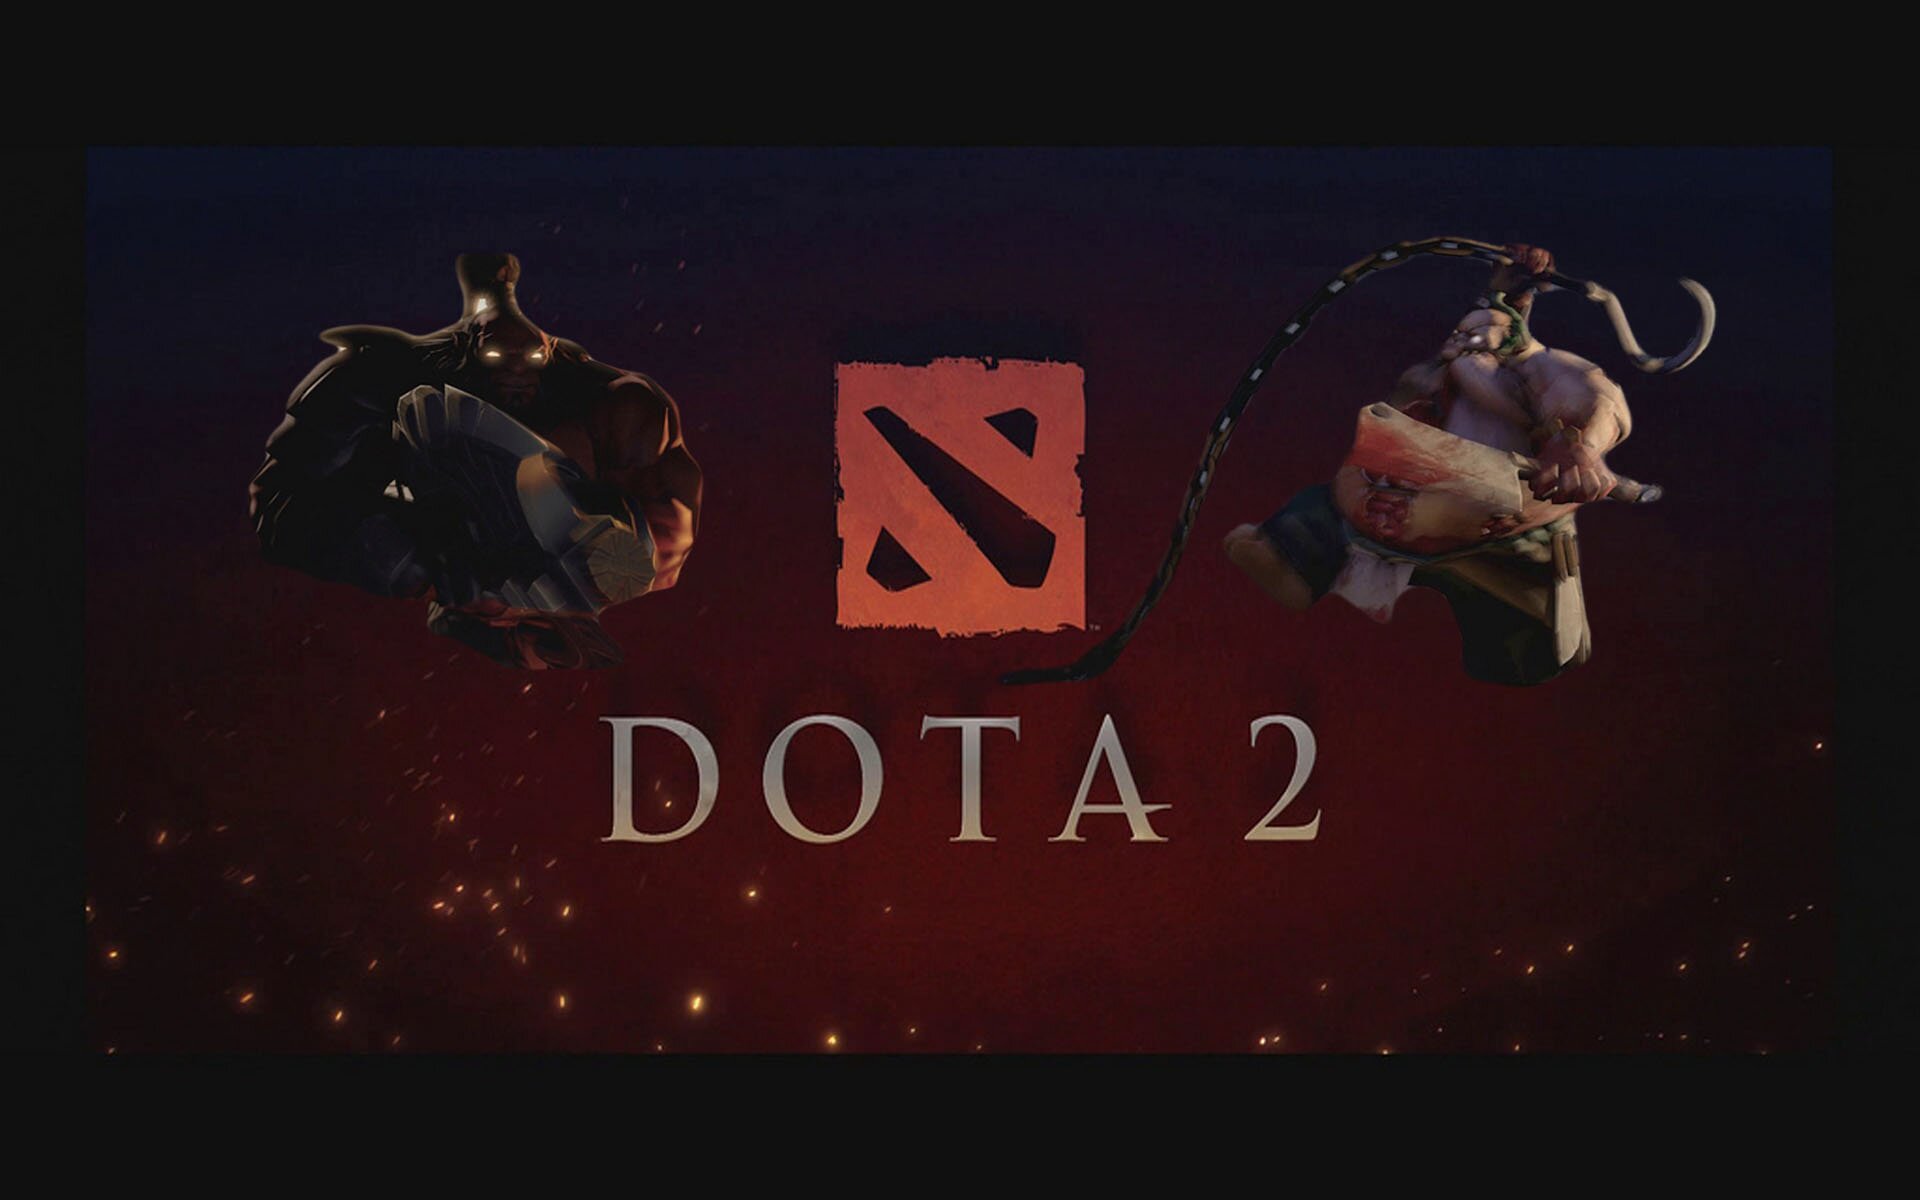 DOTA 2 Official Wallpapers